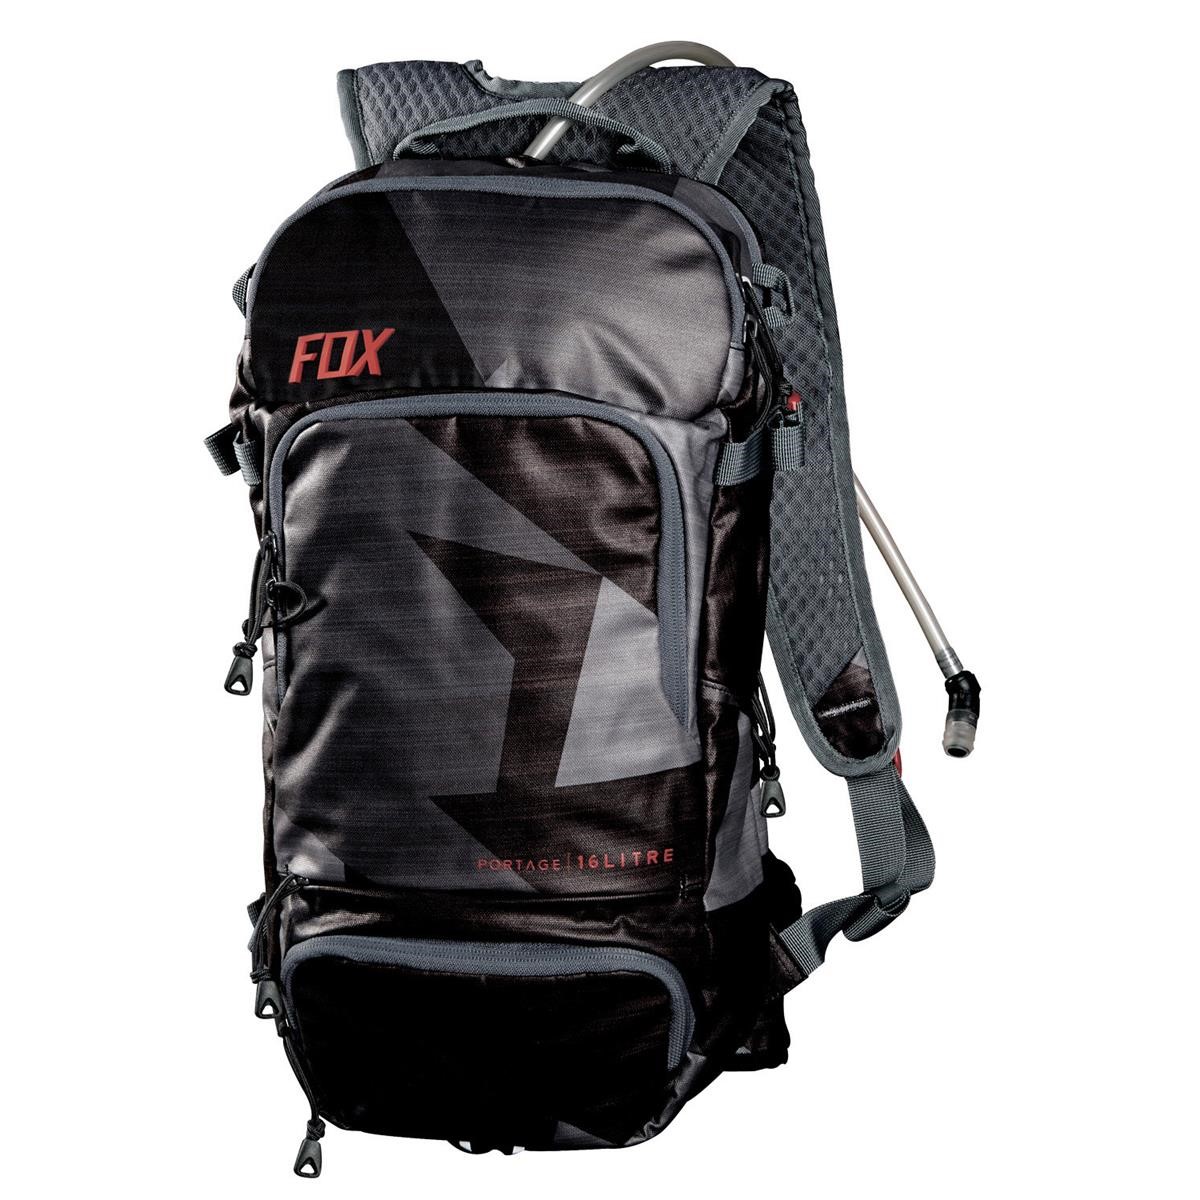 Fox Backpack with Hydration System Compartment Portage Camo